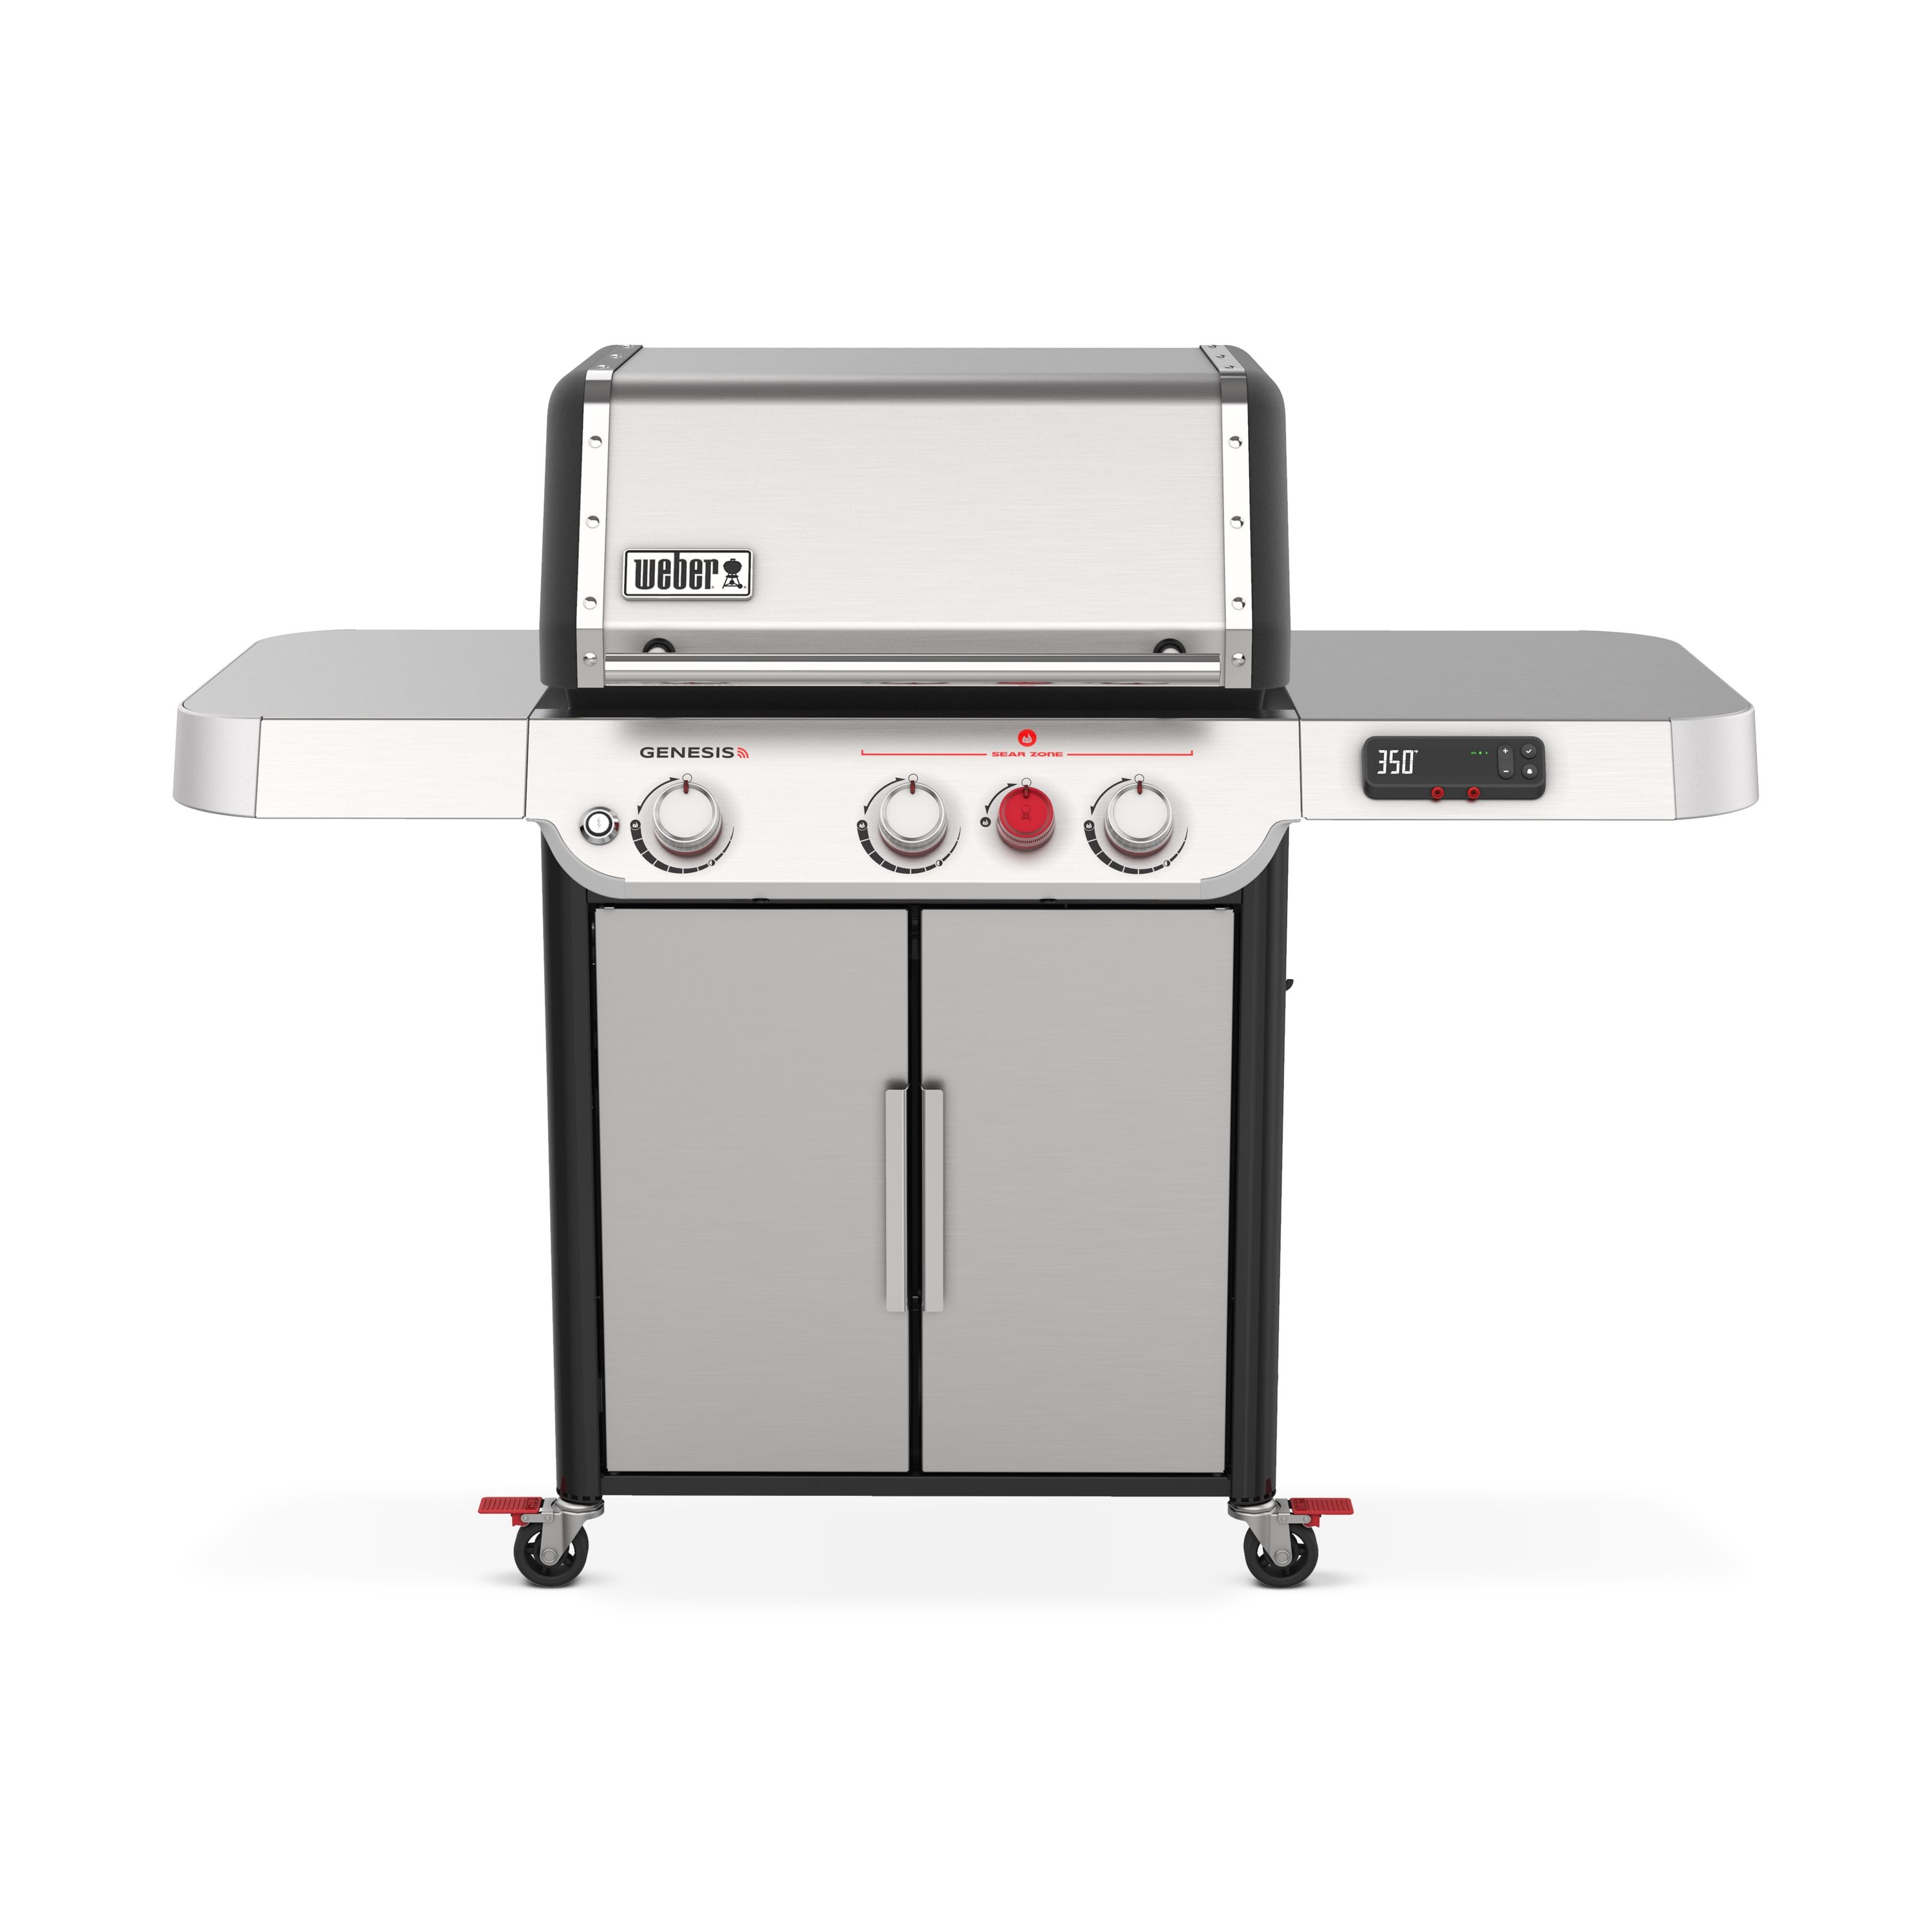 Weber Genesis Steel 3-Burner Liquid Propane Gas Grill in the Gas Grills at Lowes.com